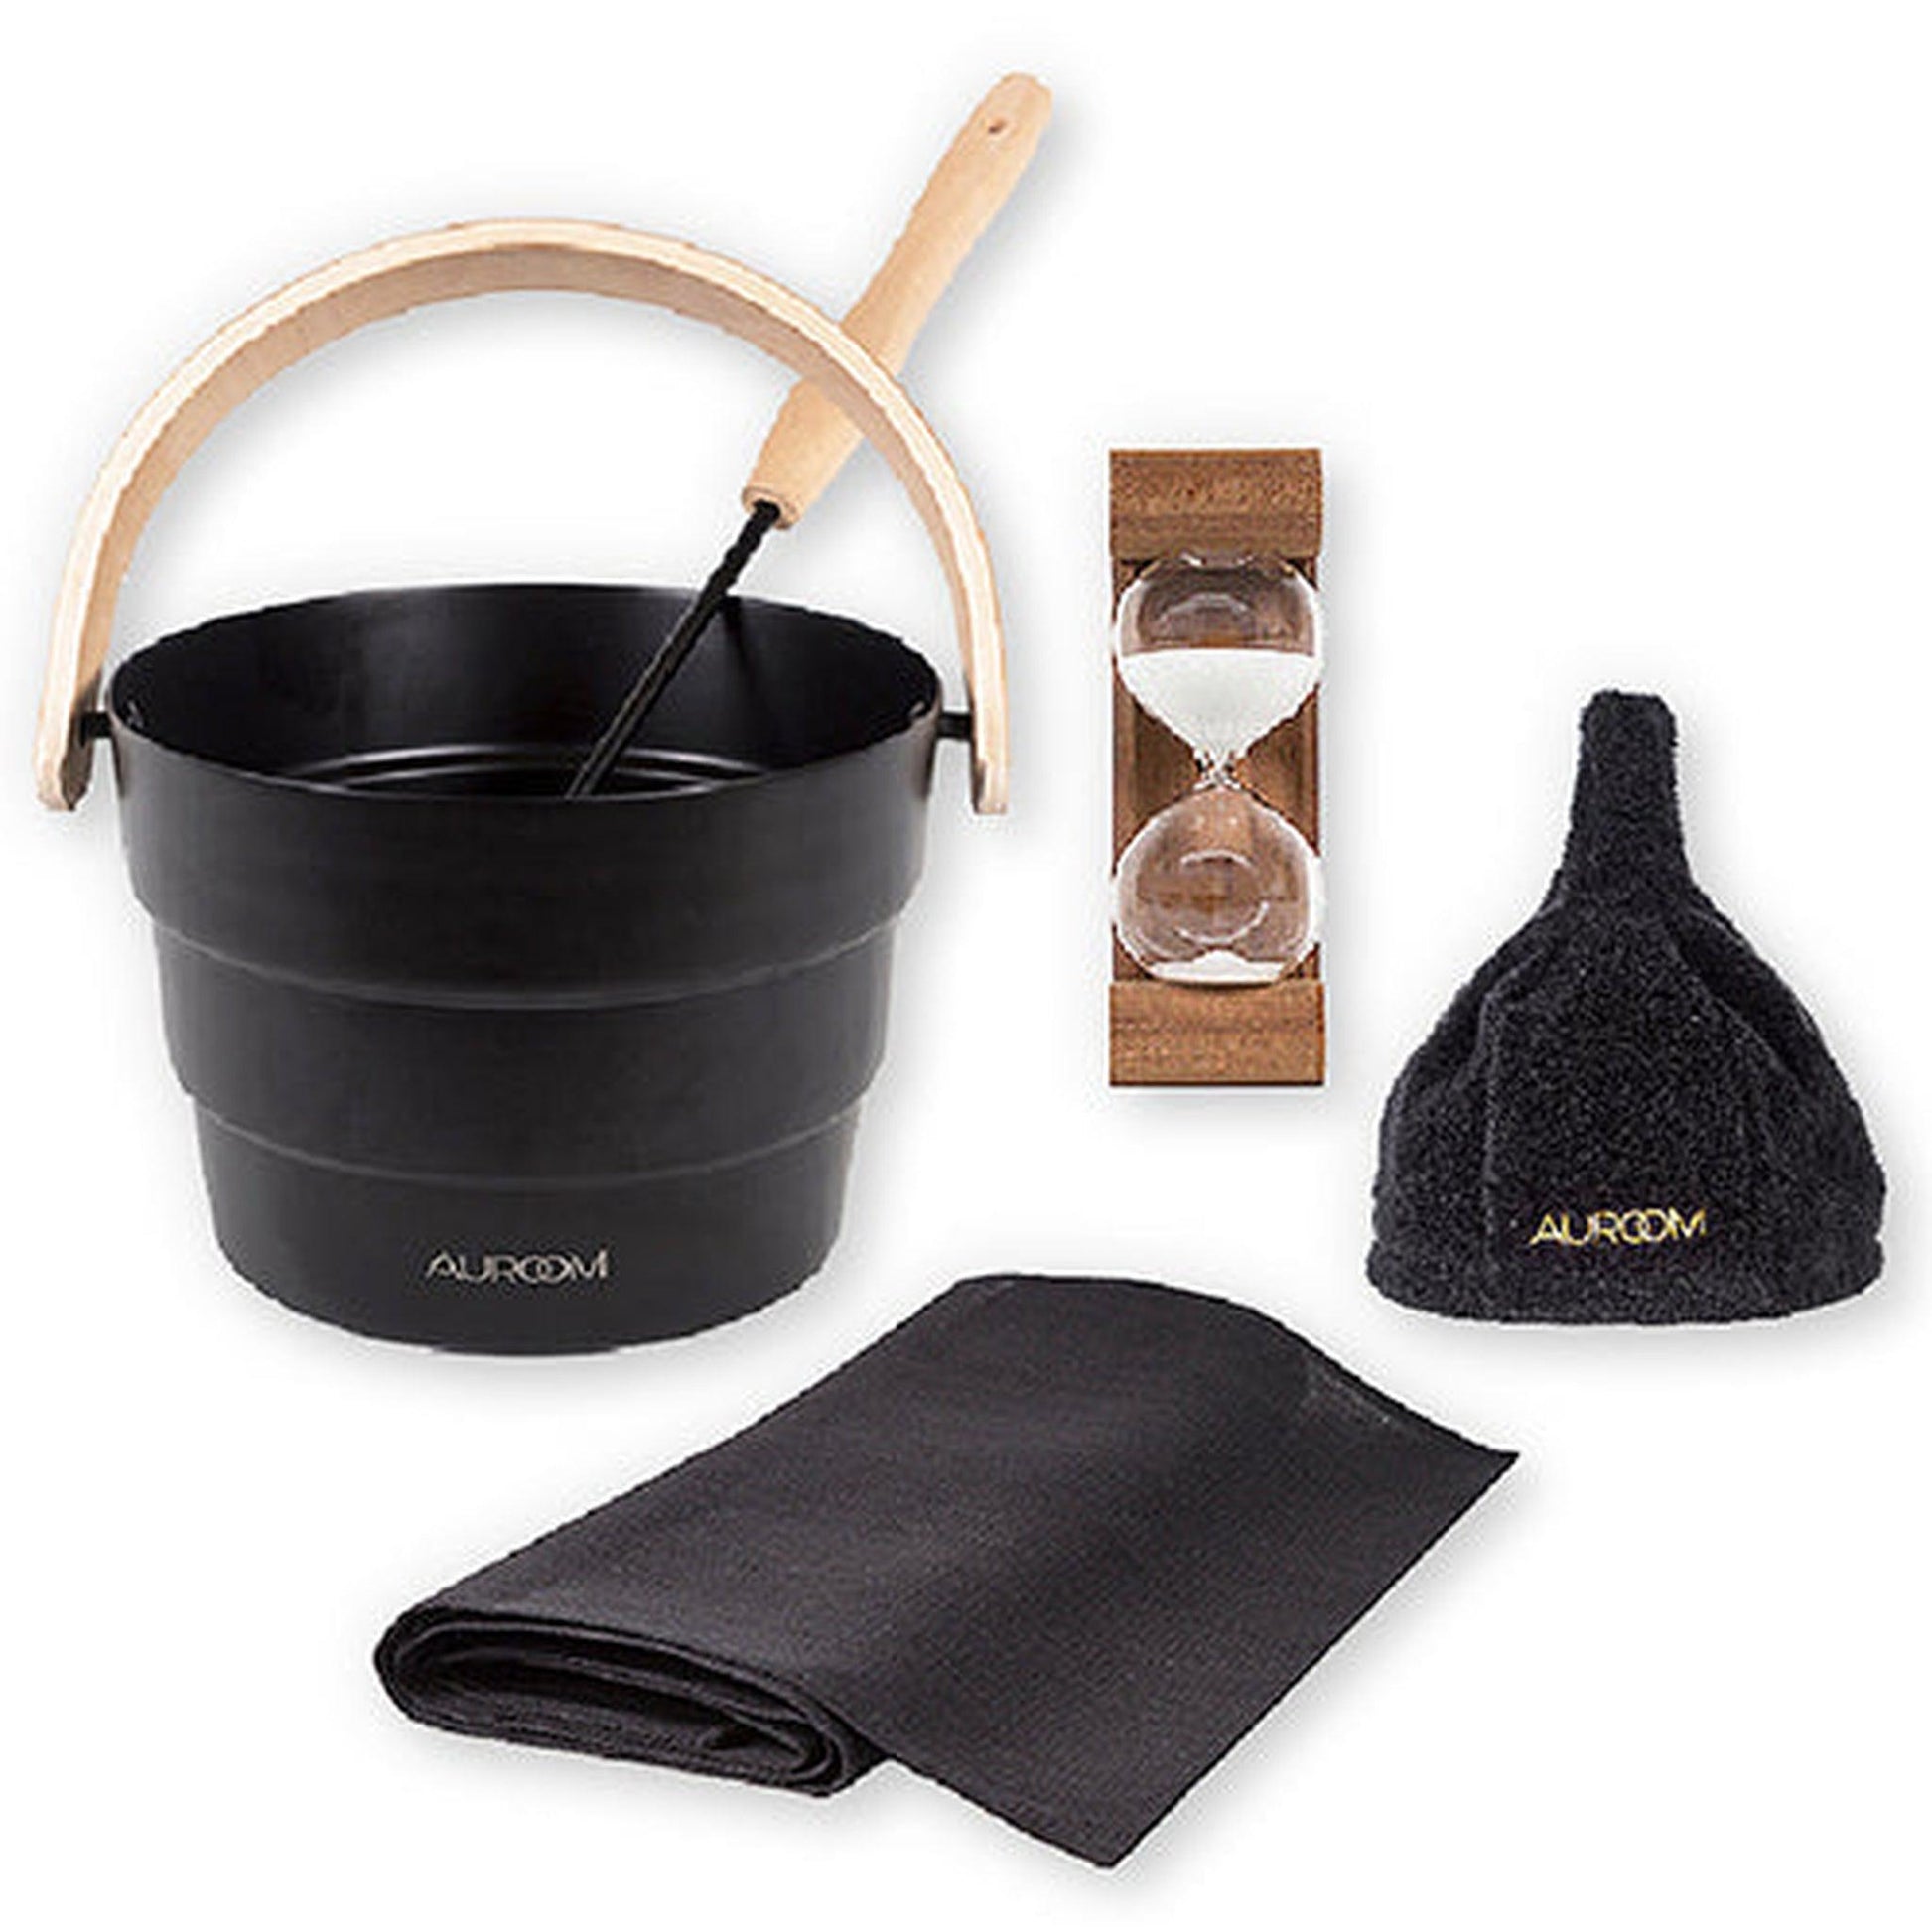 Auroom Sauna Accessory Package With Pail, Ladle, Timer, Seat Covers & Sauna Hat